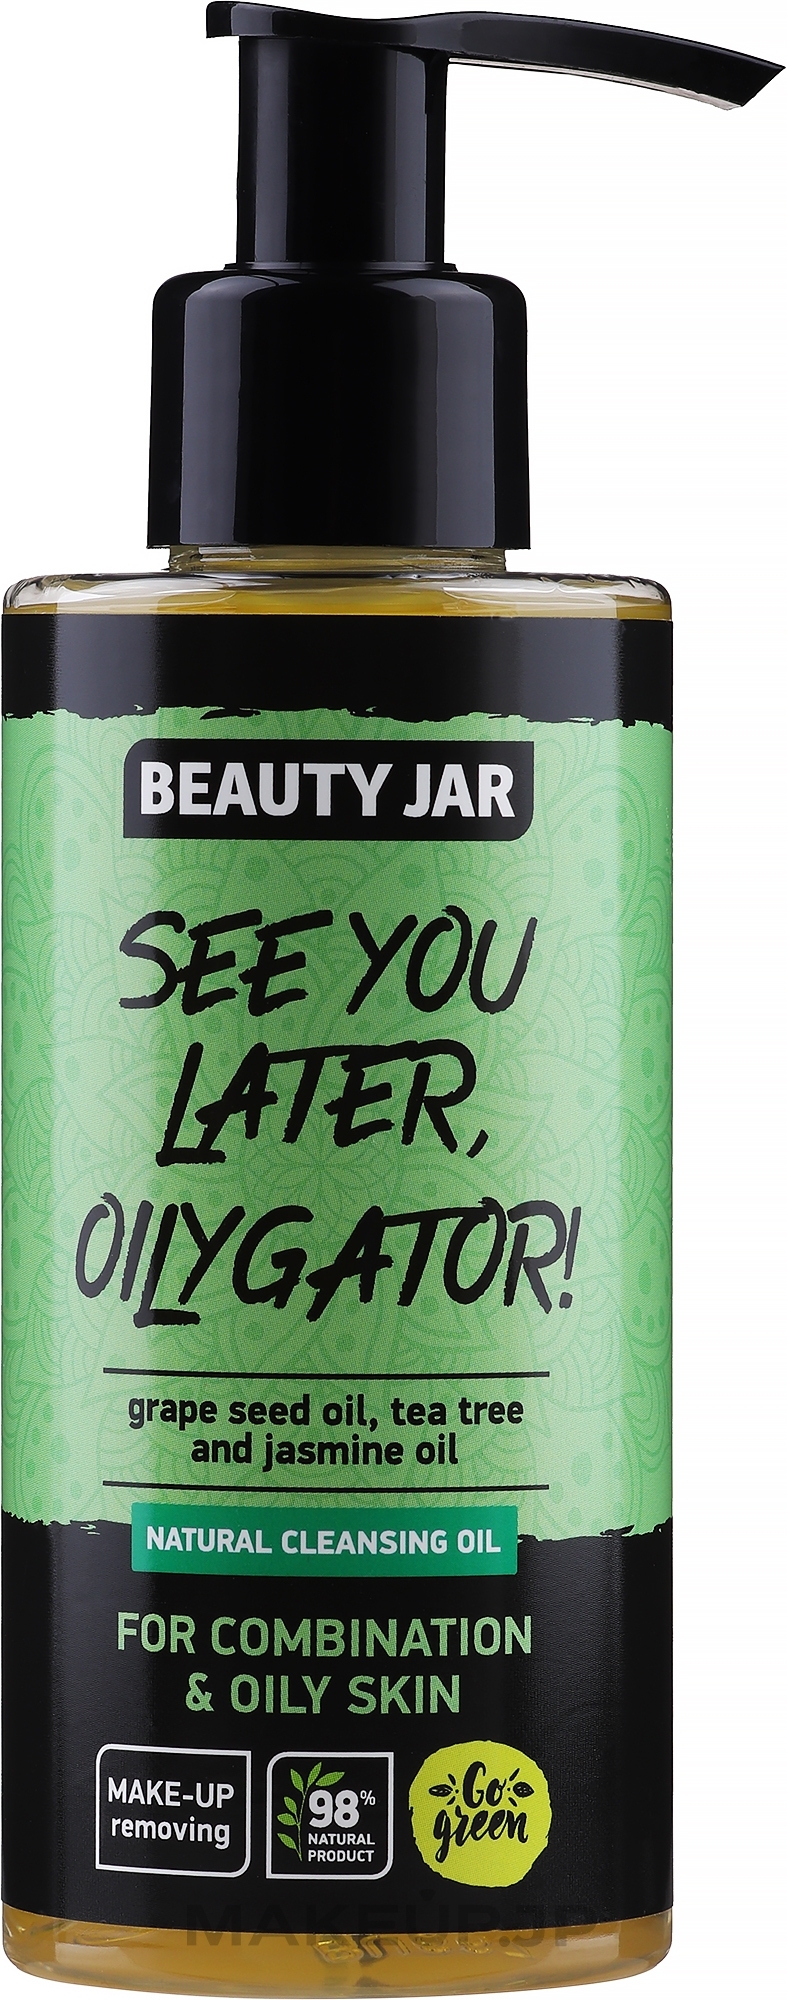 Cleansing Face Oil for Combination and Oily Skin "See You Later, Oilygator" - Beauty Jar Natural Cleansing Oil — photo 150 ml